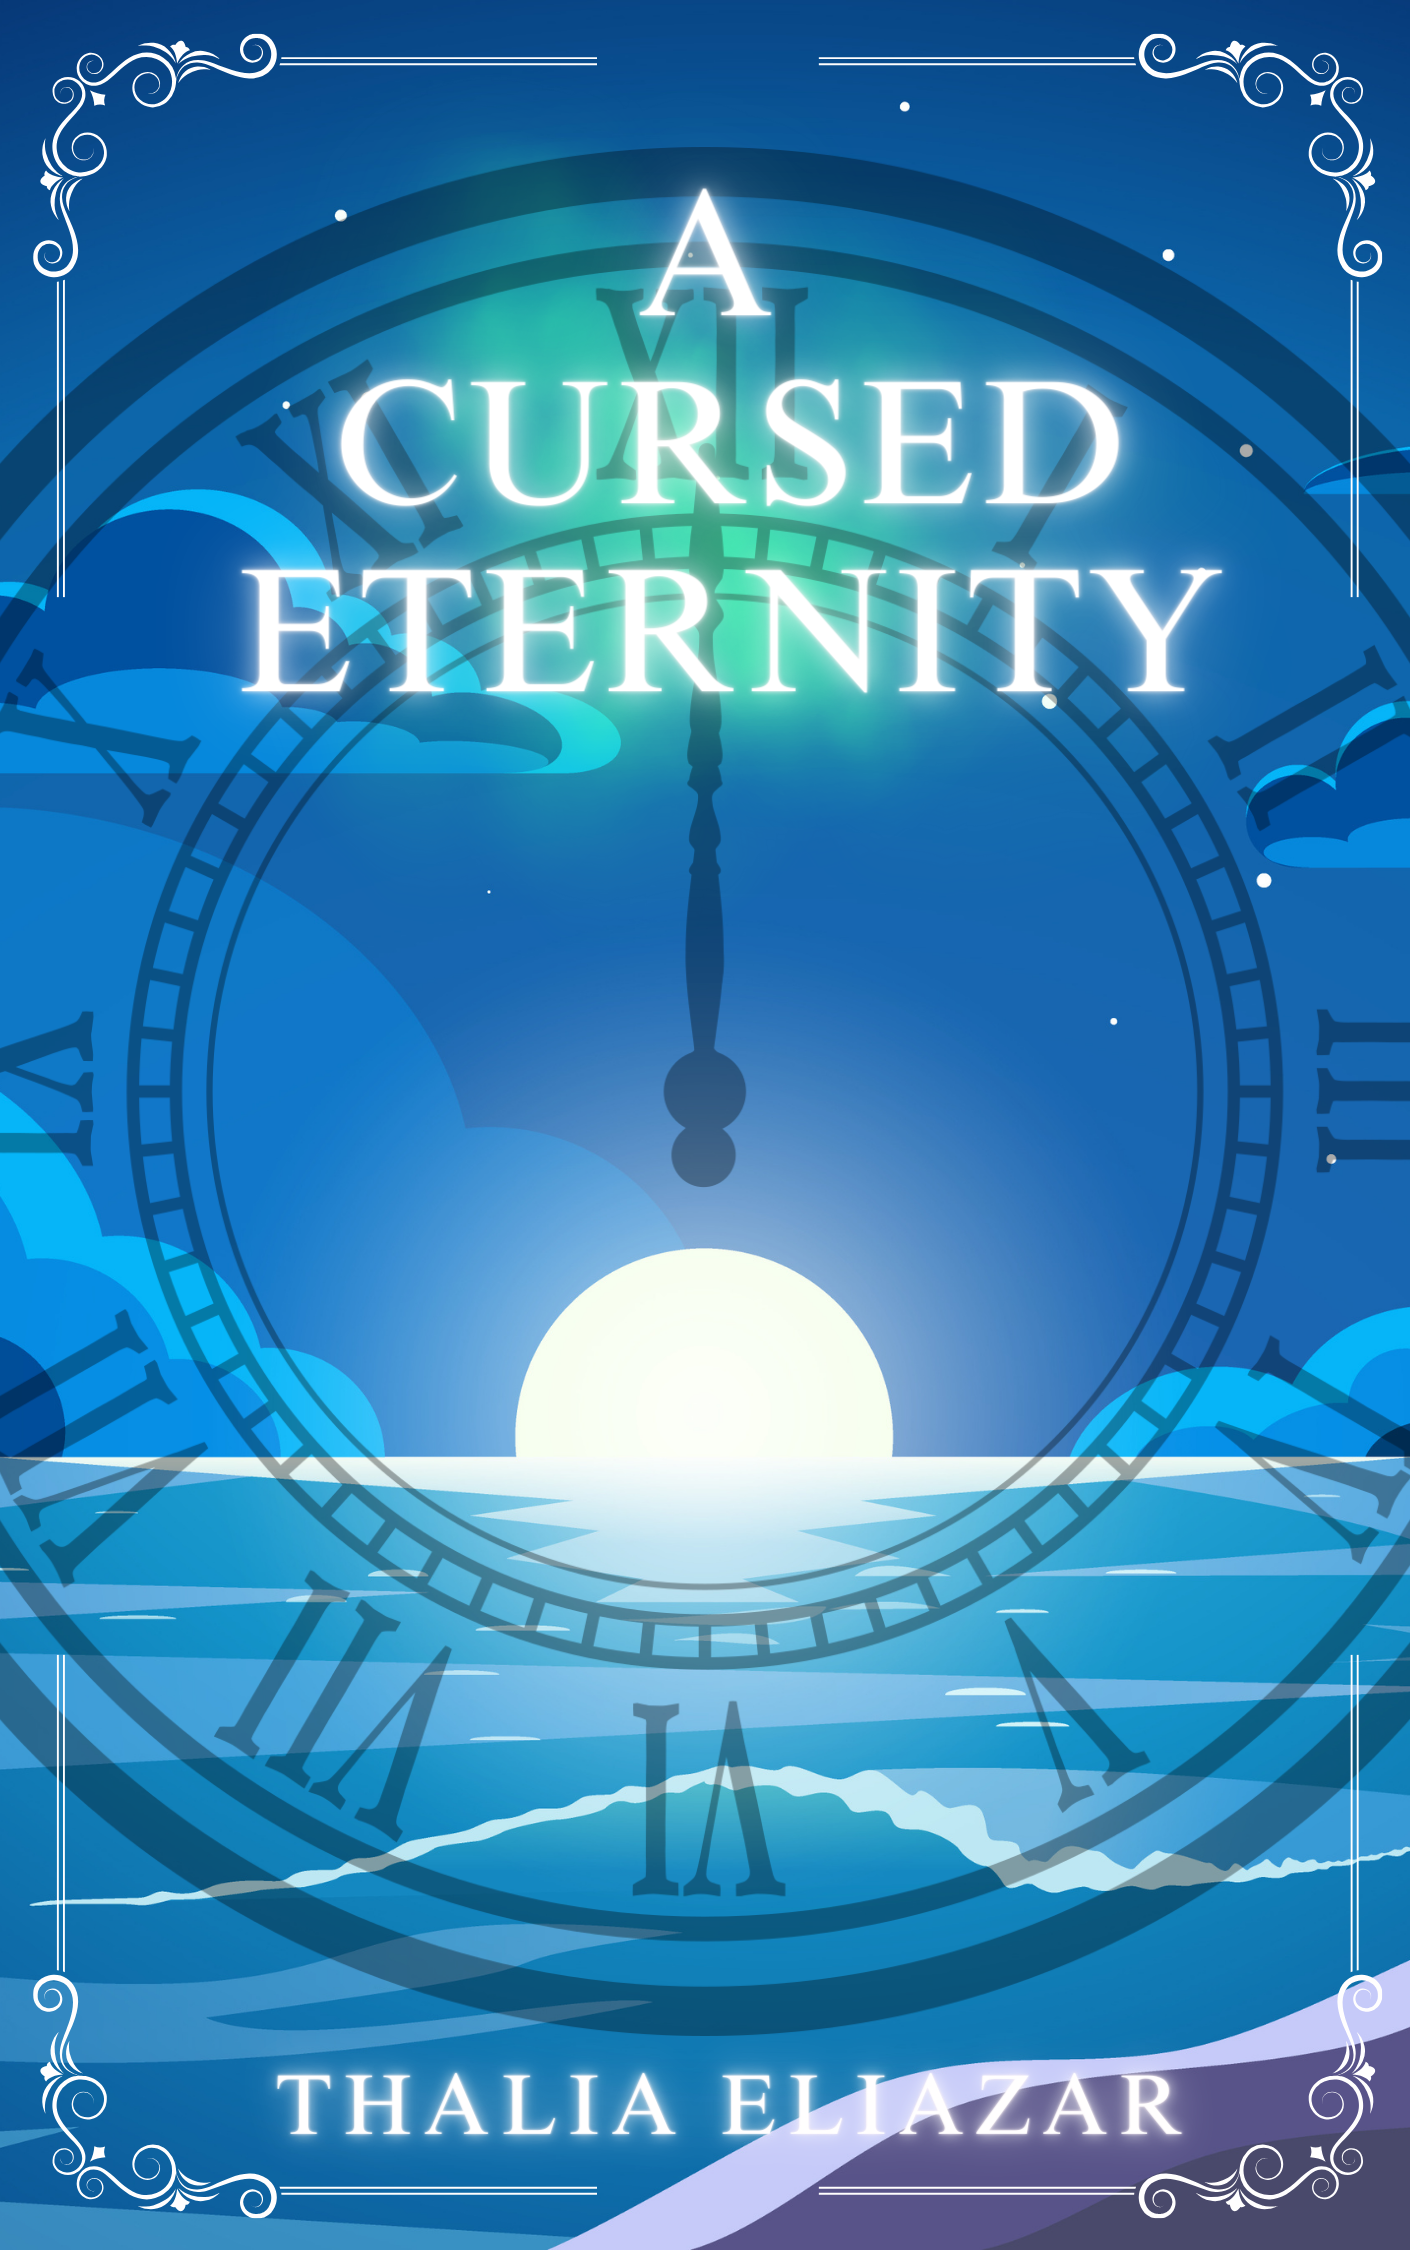 A Cursed Eternity - Prologue